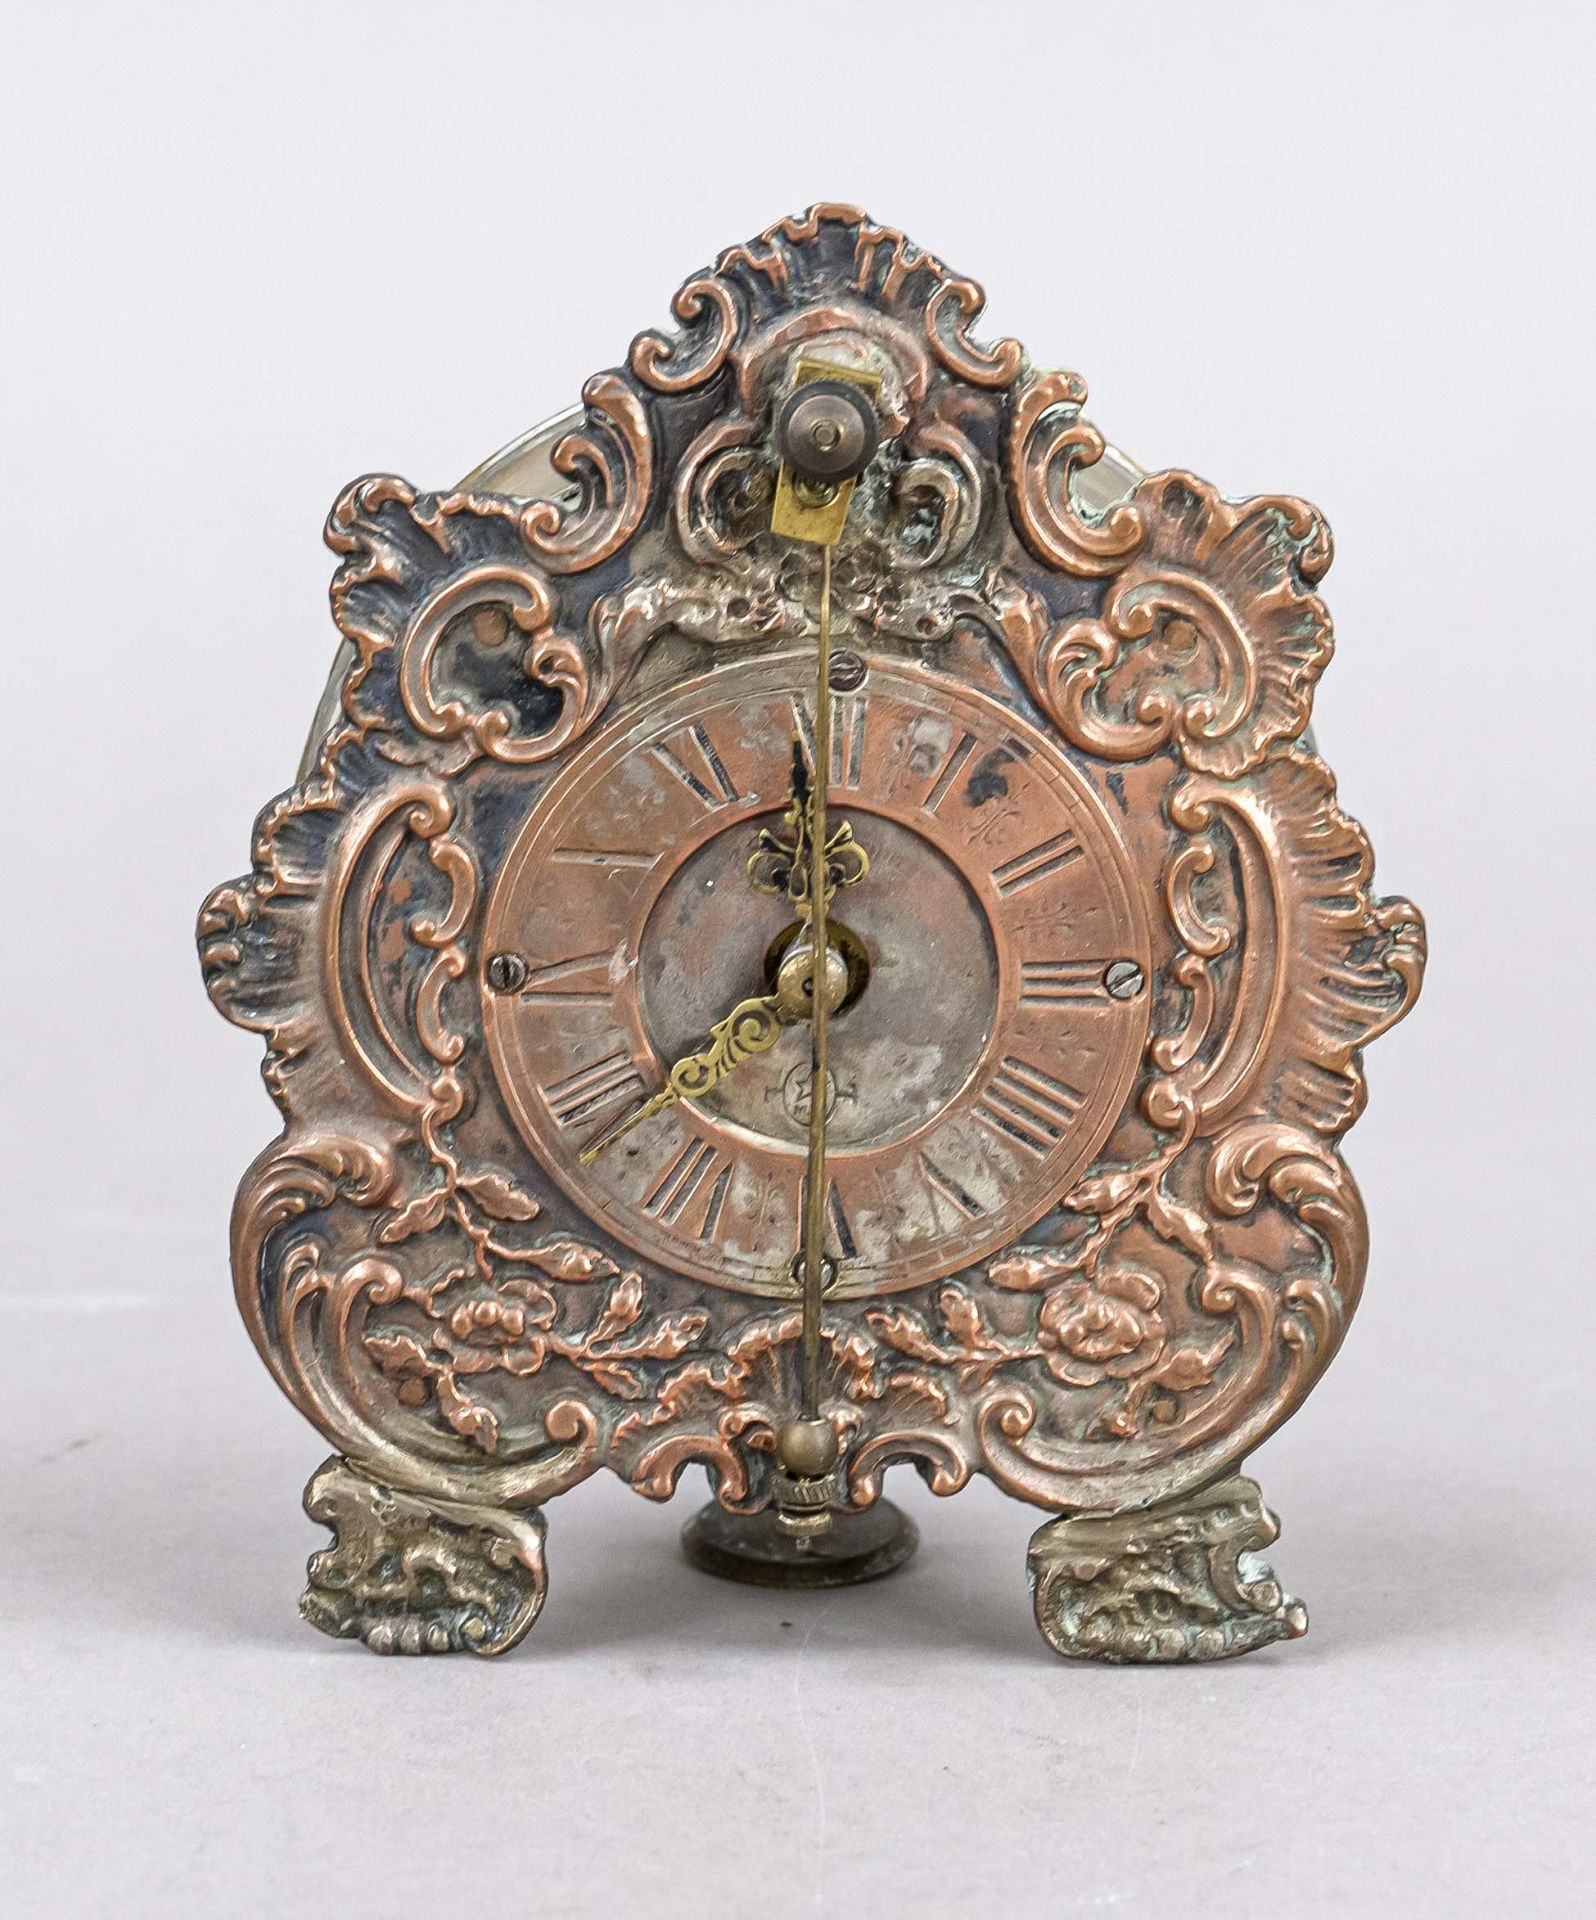 small table clock Zappler, cast copper dial with residual silvering, decorated with rocailles, roman